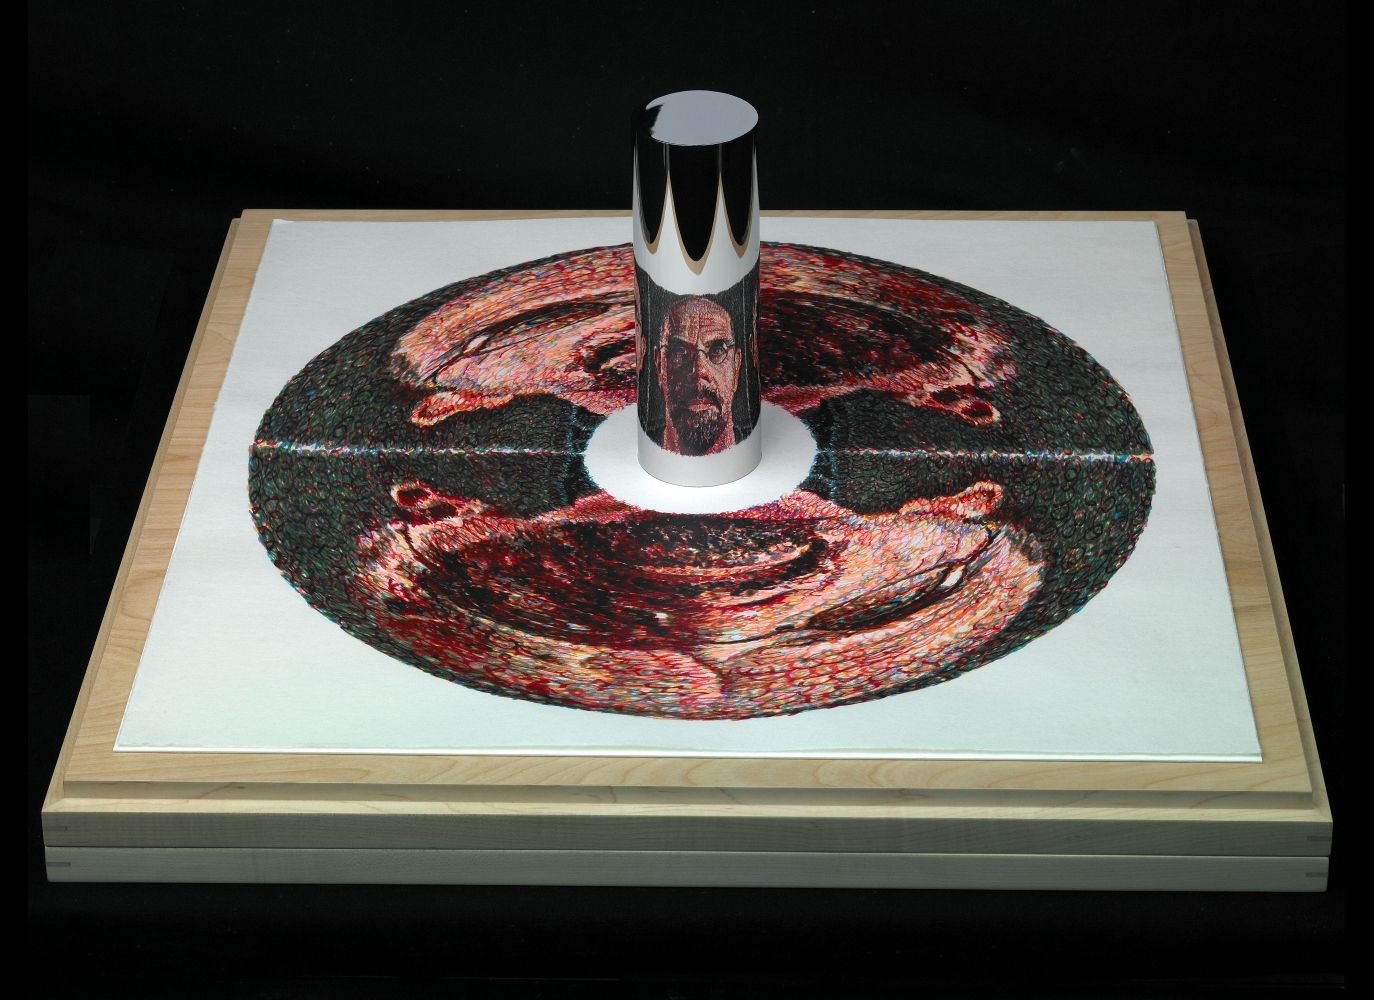 Self-Portrait (anamorphic), 2009
16 color silkscreen on Tosahanga paper, polished stainless steel cylinder, and maple wooden box/platform
27&amp;nbsp;x 27&amp;nbsp;x 11 1/4&amp;nbsp;inches
Edition of 20